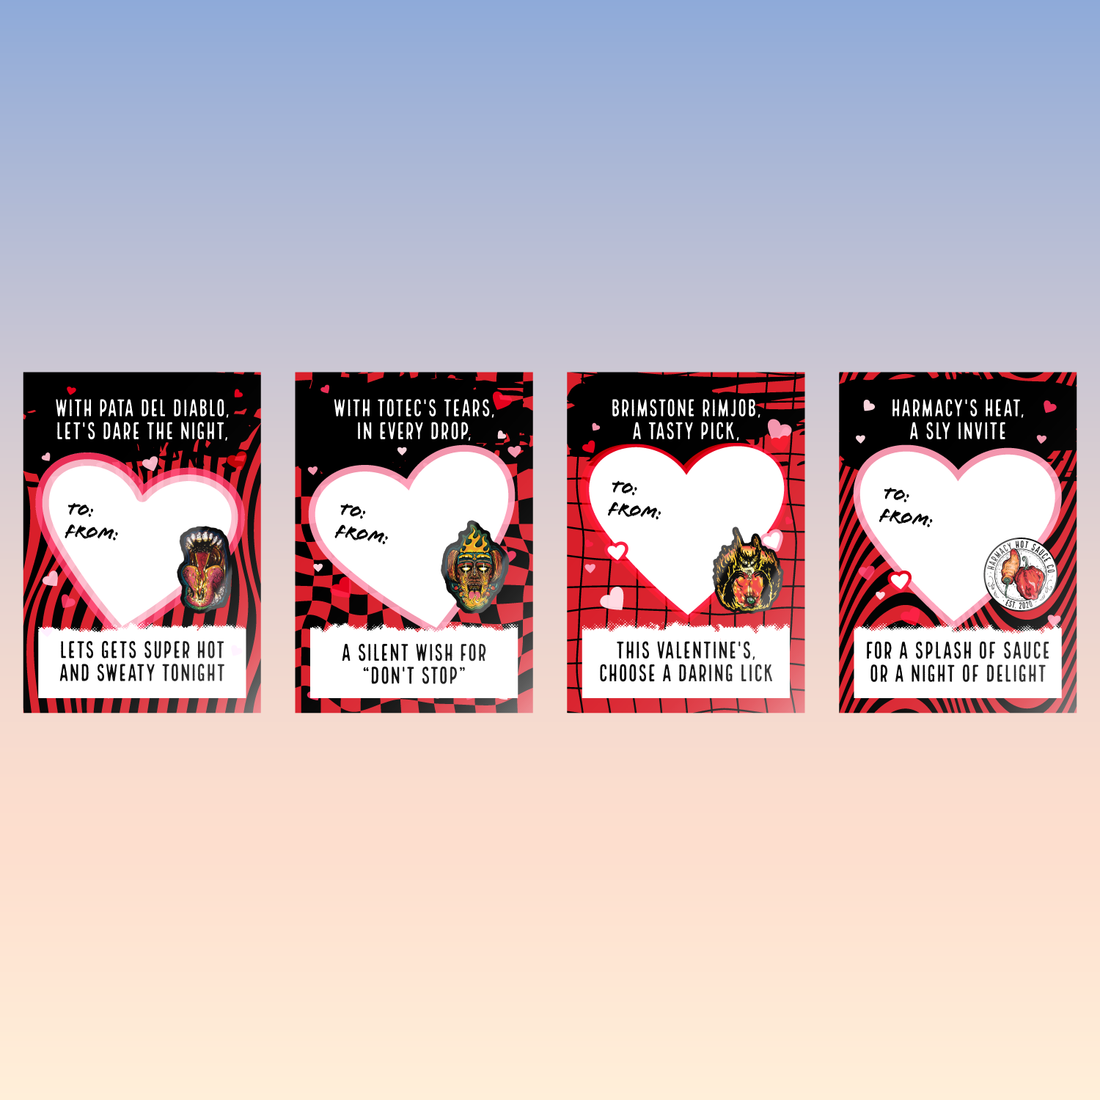 Spread Laughter This Valentine's Day with Harmacy Hot Sauce Co.'s Gag Cards!